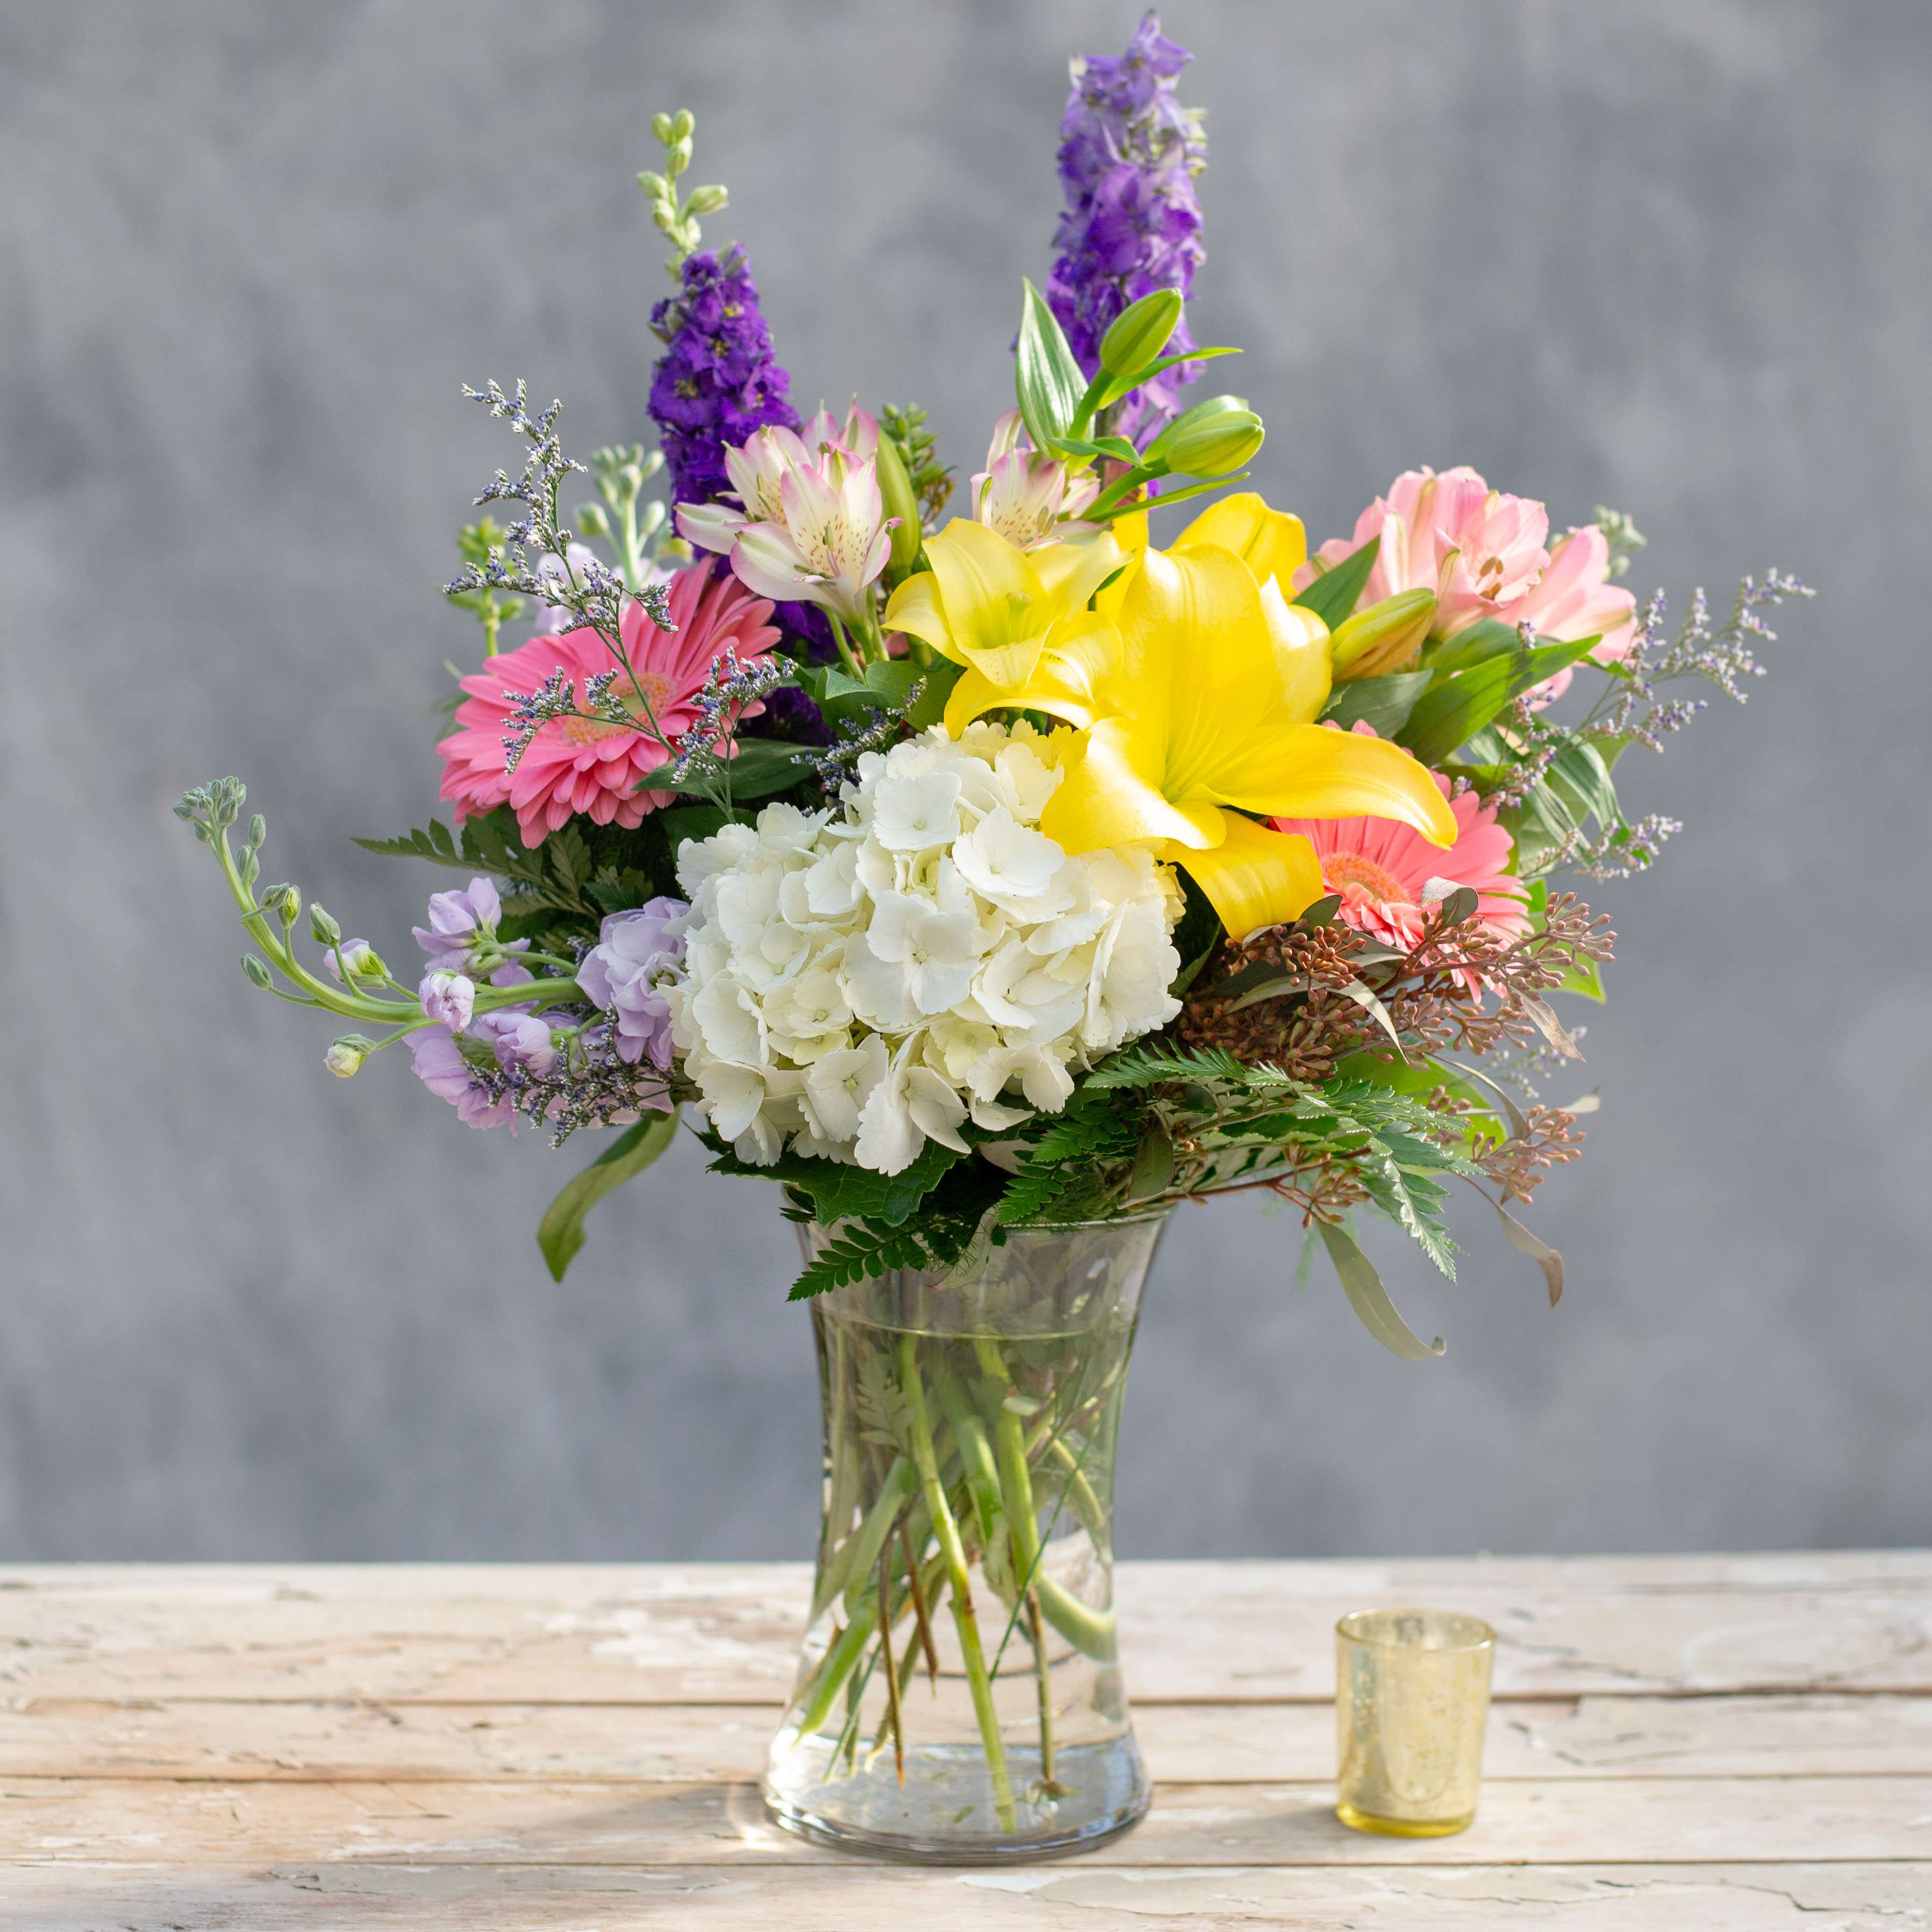 Bristow - A stunning addition to any home, apartment or office, this clear glass gathering vase, filled with the colors of Spring, purples, lavender, yellows and pink.  Flowers include, hydranga, larkspur, stock, lilies, gerbera daisies and alstroemeria.  